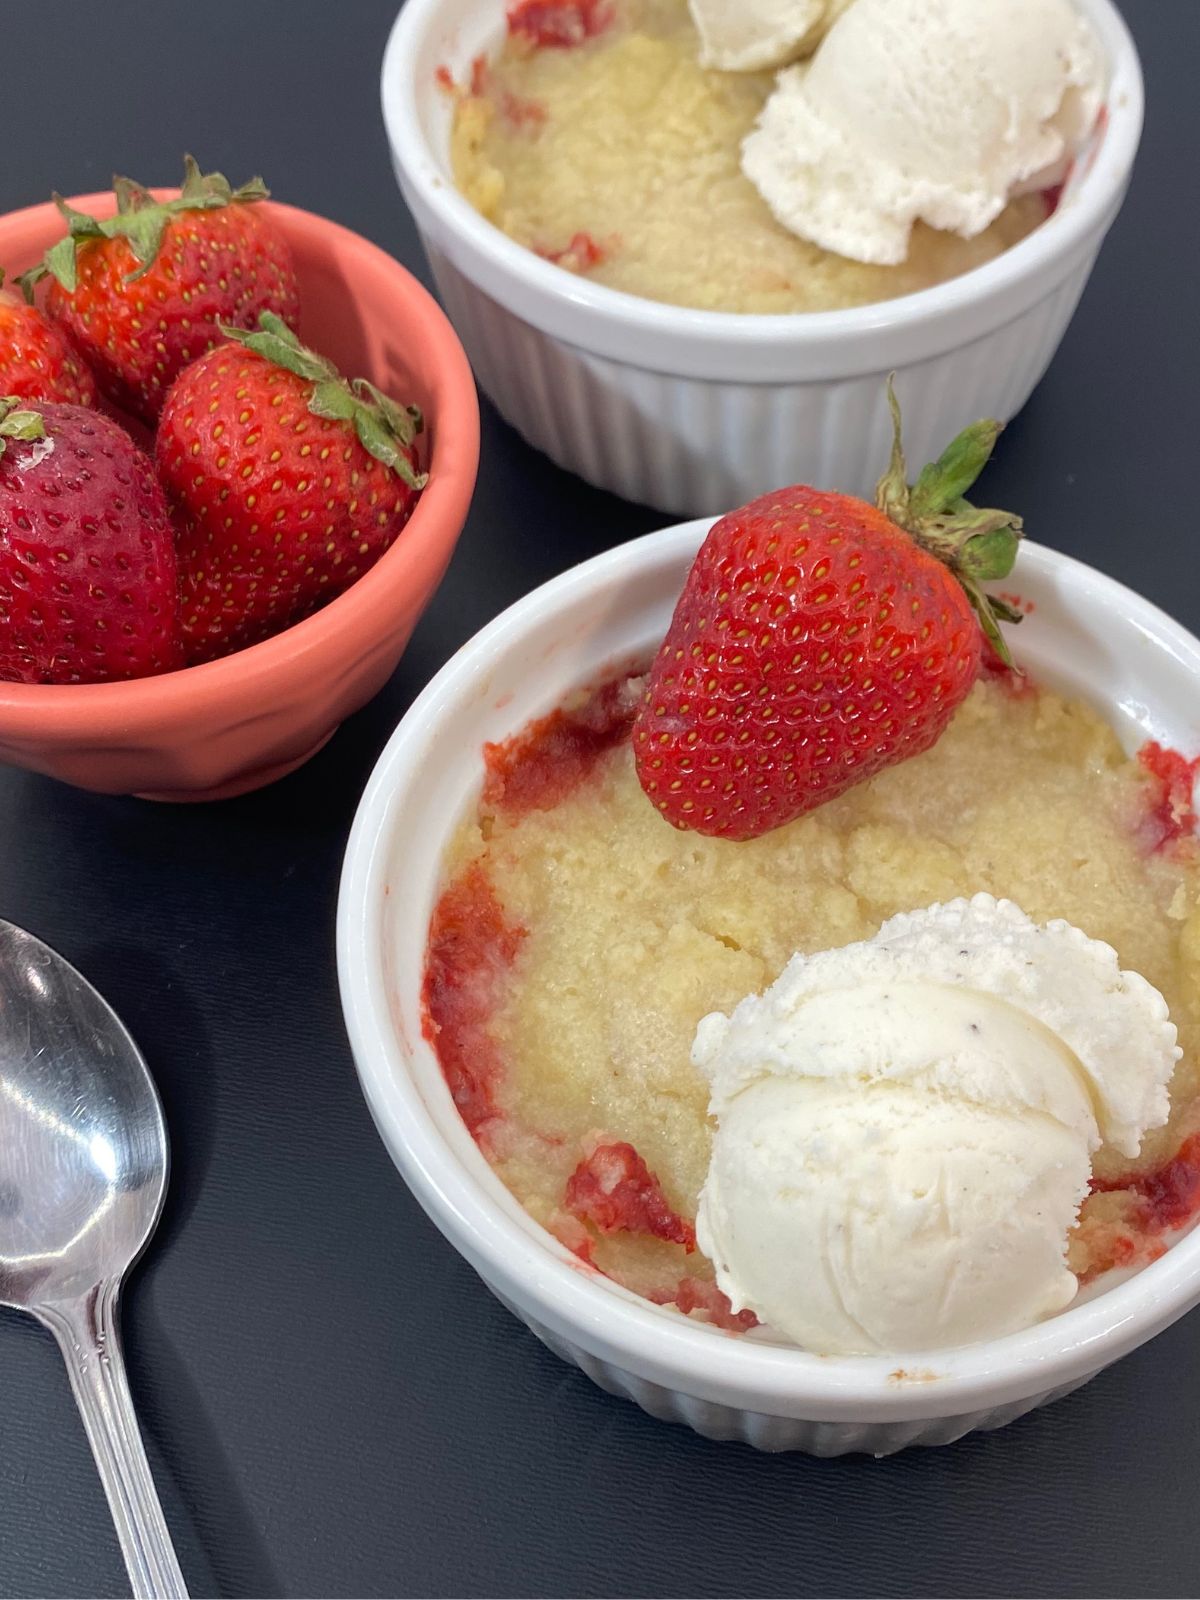 strawberry and apple crumble in ramekins topped with vanilla ice cream